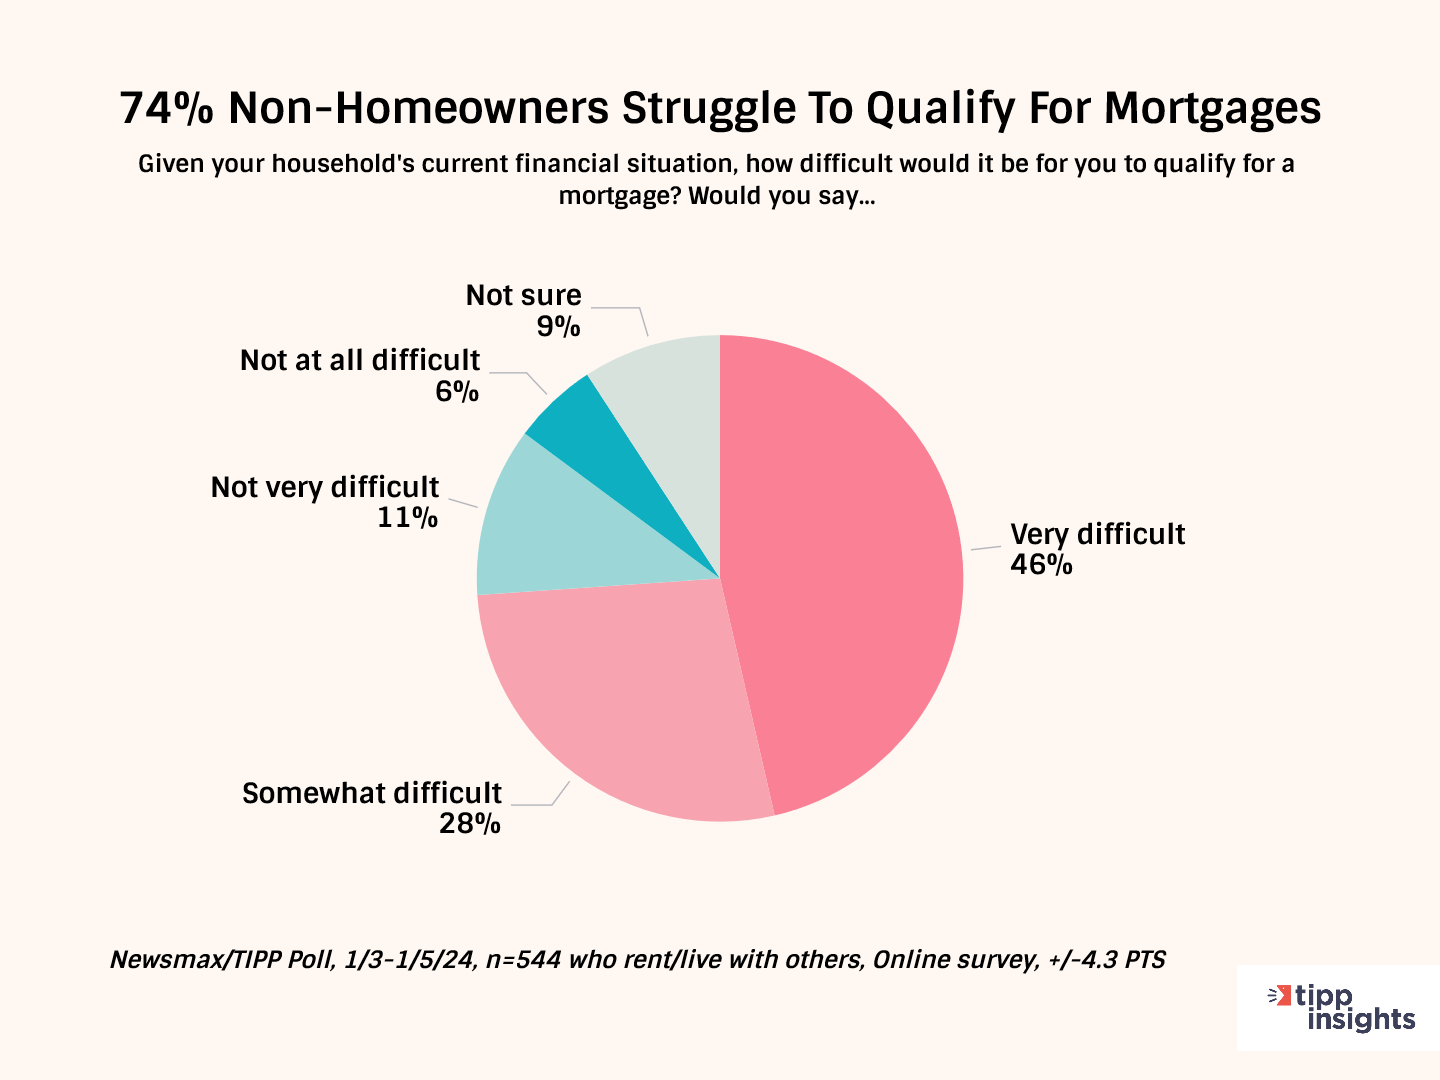 74--Non-Homeowners-Struggle-To-Qualify-For-Mortgages.png